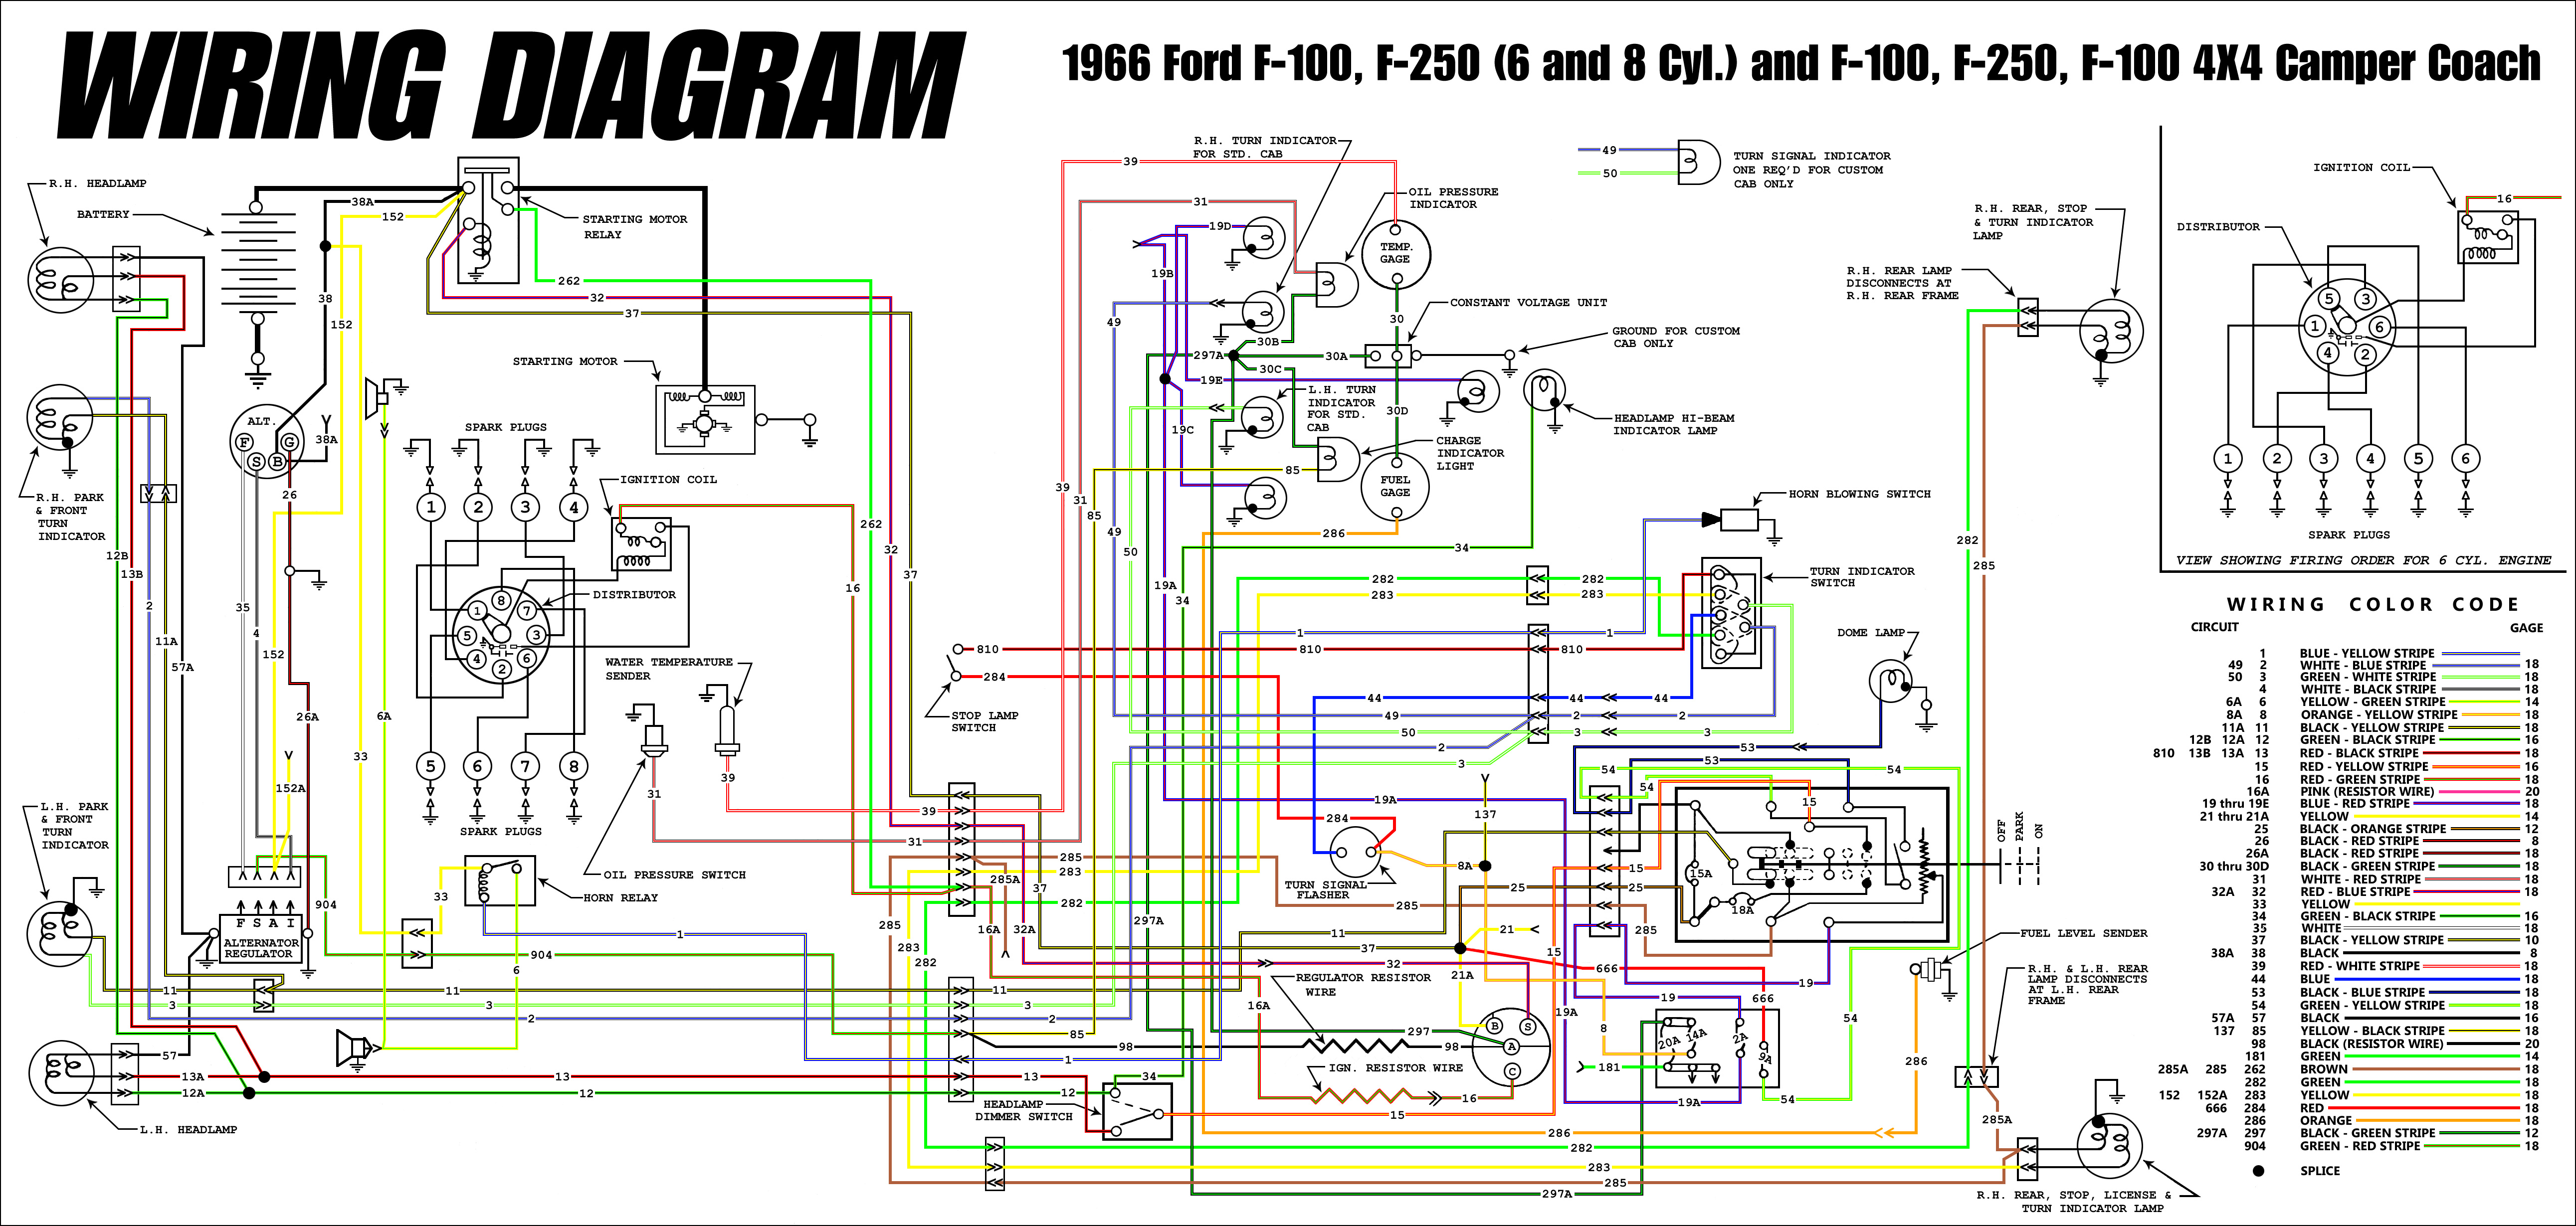 1966 Ford Truck Wiring Diagrams - FORDification.info - The '61-'66 Ford  Pickup Resource  1966 Ford Alternator Wiring Diagram    FORDification.info